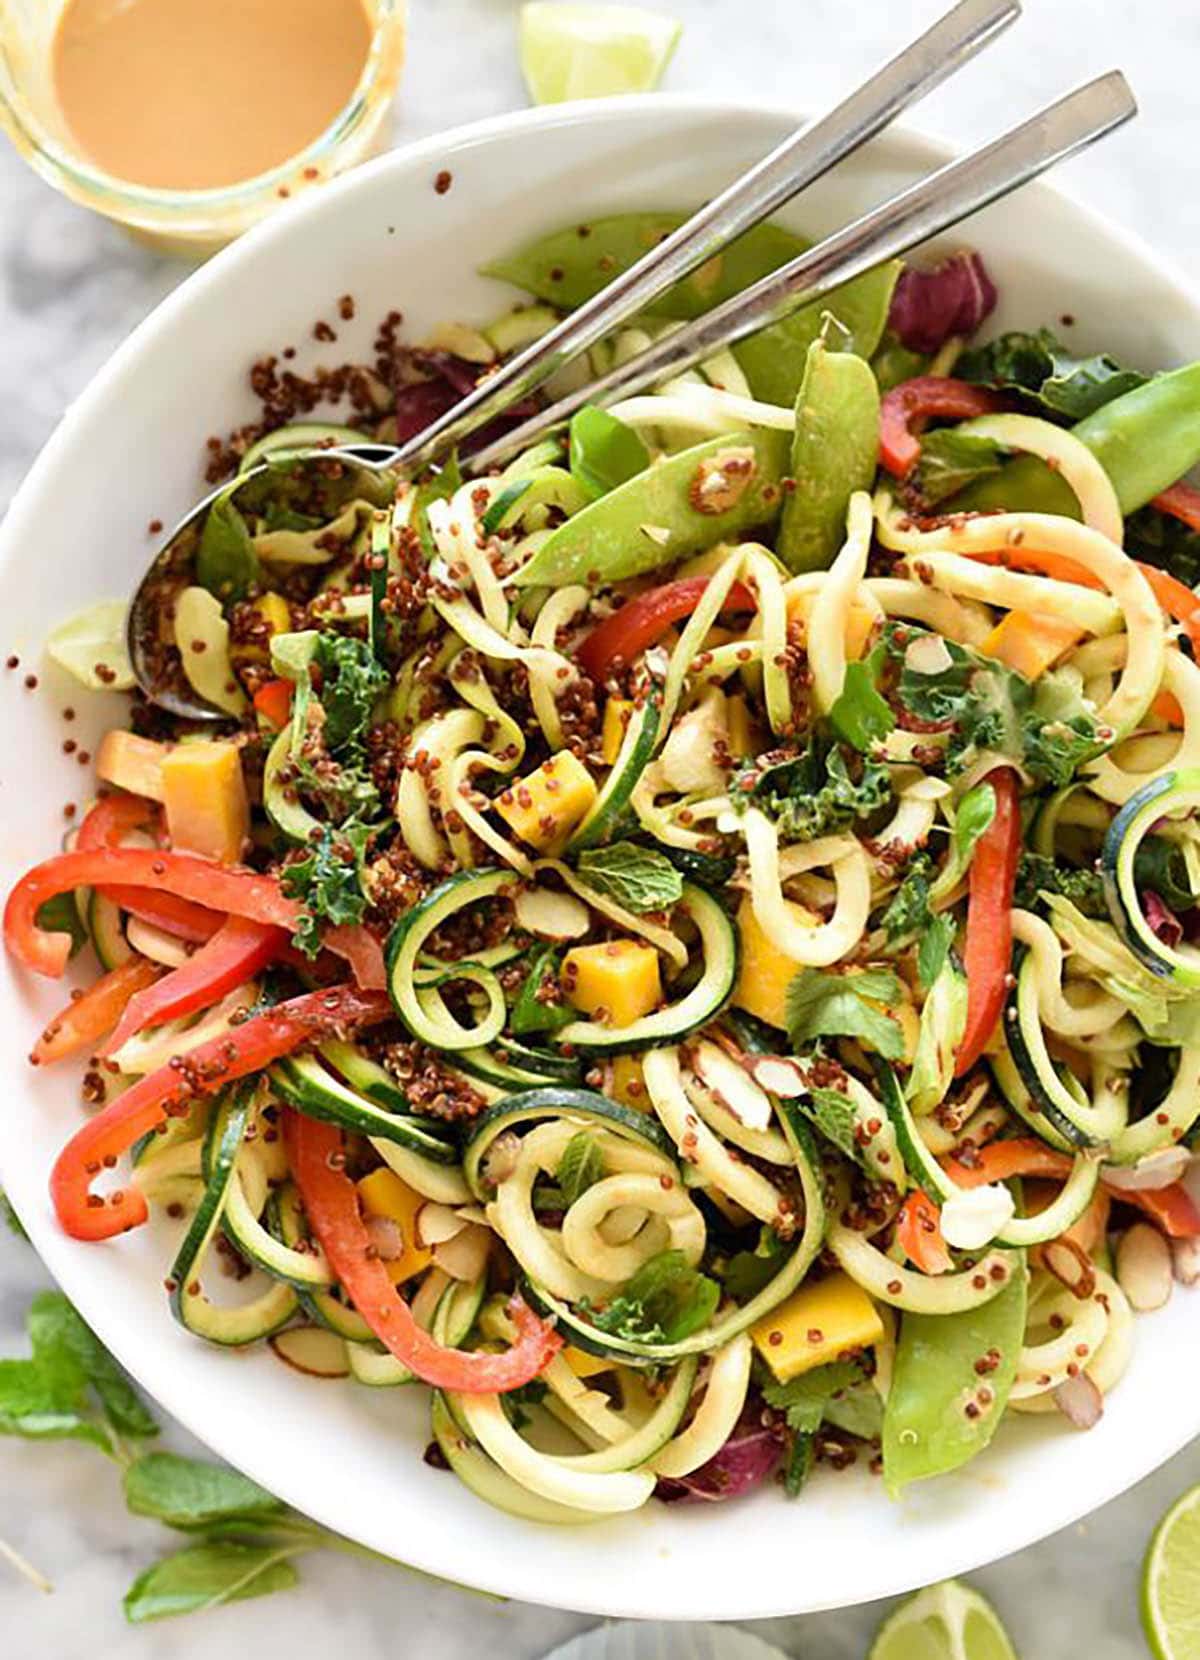 Thai Zucchini Noodle and Quinoa Salad Garnished with Almonds, Basil, Mint and Cilantro.